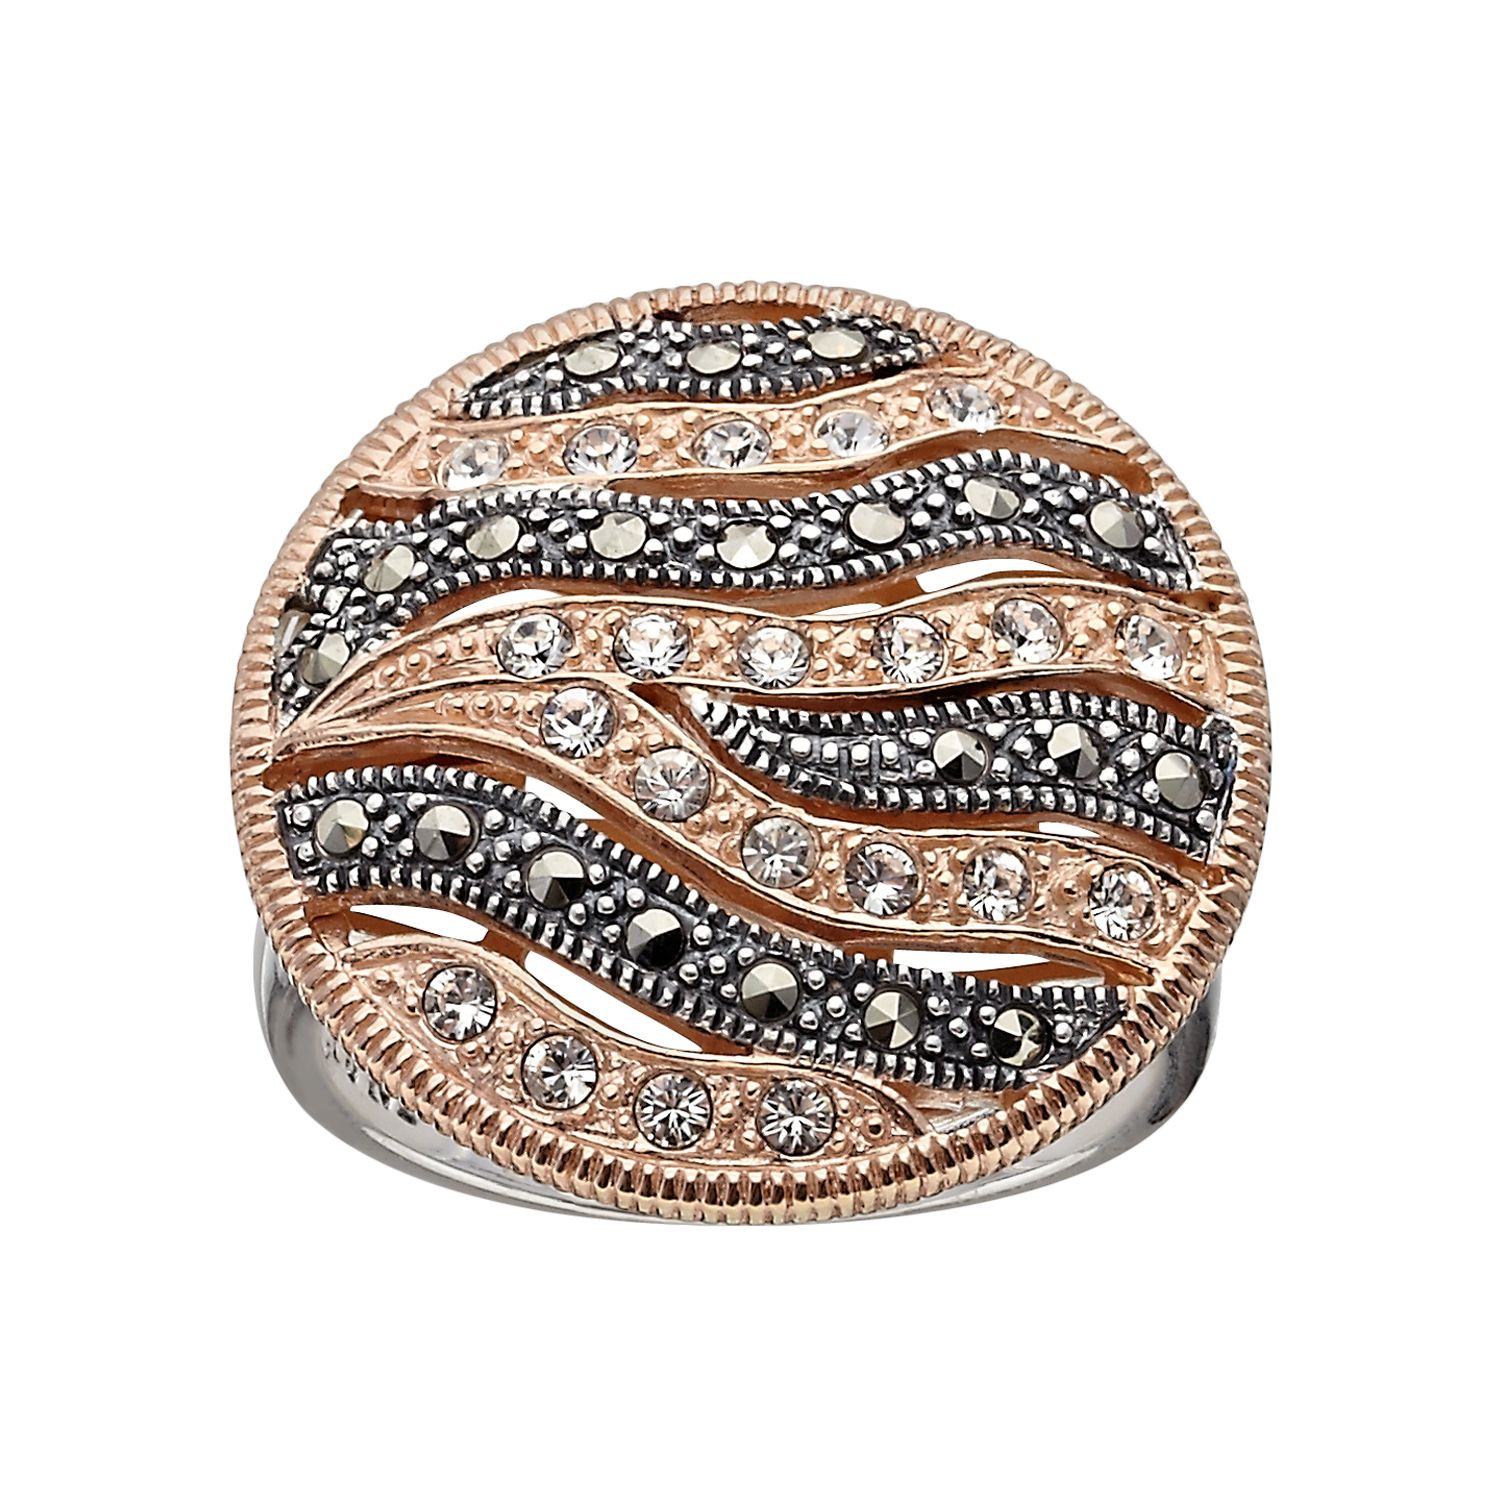 Image for Lavish by TJM Two Tone 18k Rose Gold Over Silver Crystal Wavy Ring at Kohl's.